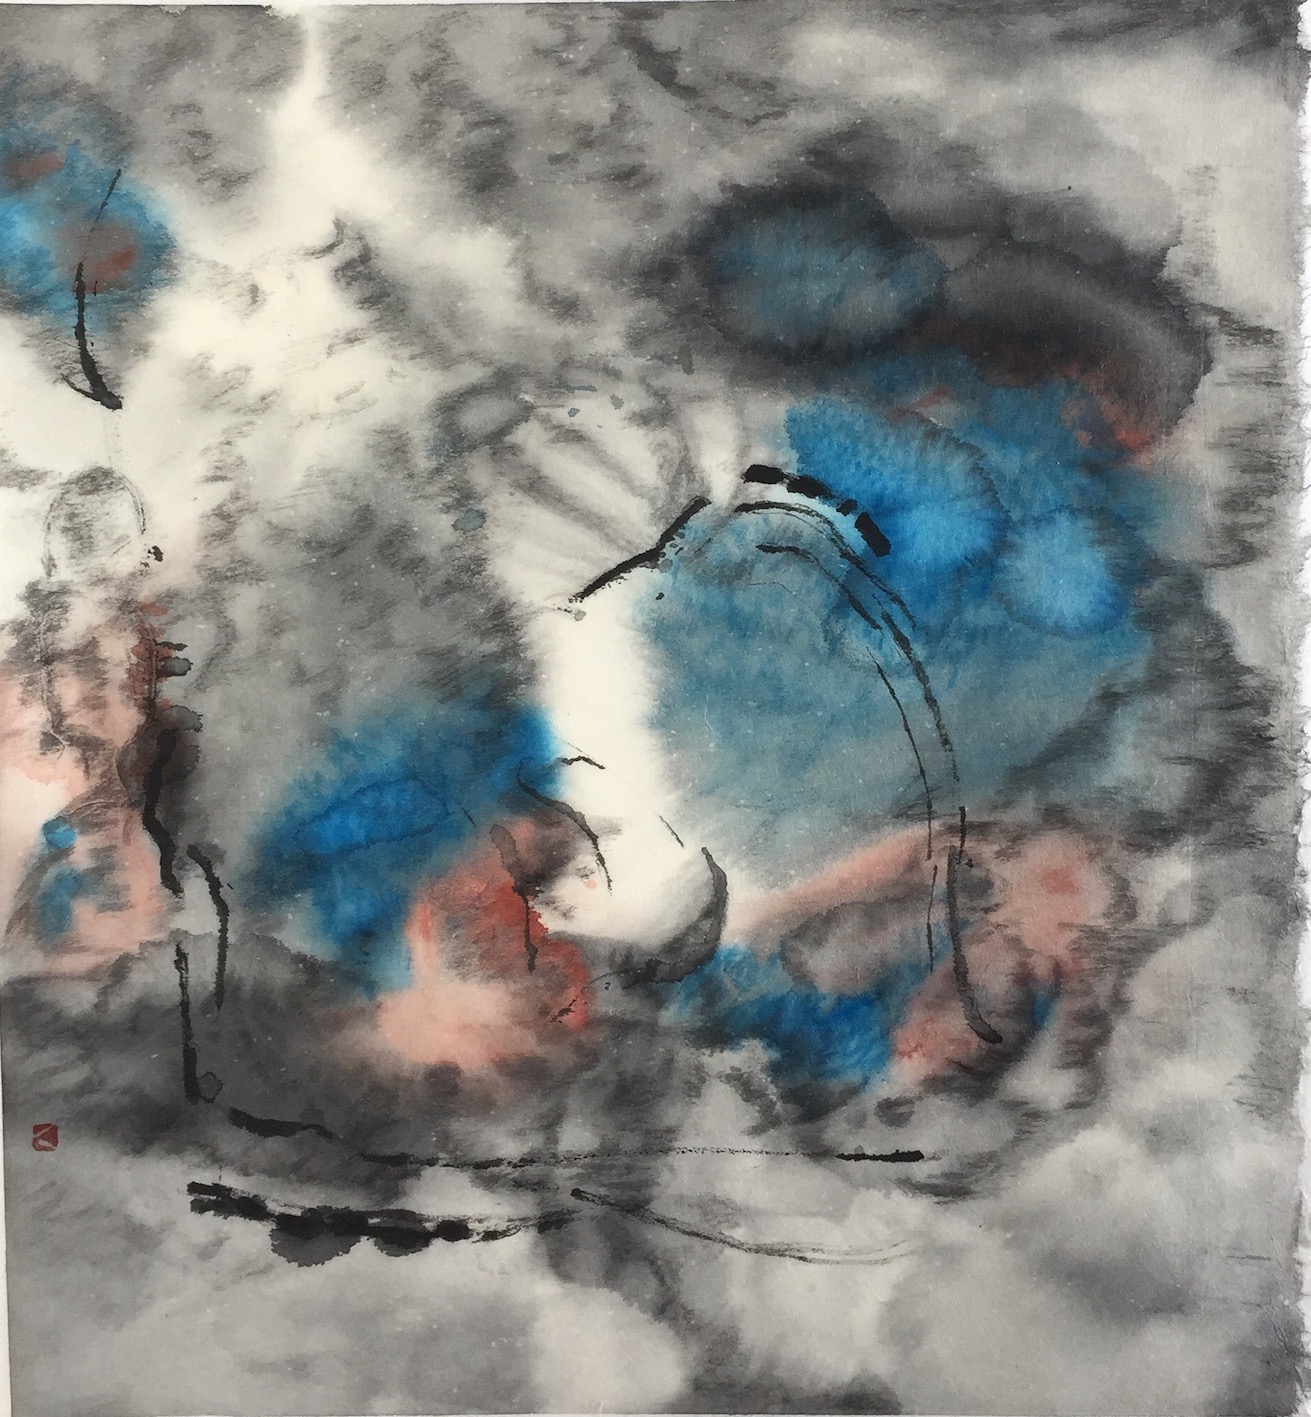 Clouds Dancing 2 24 X 25 cms Sumi ink, acrylic, 踊る雲 2 墨、アクリル　　2020